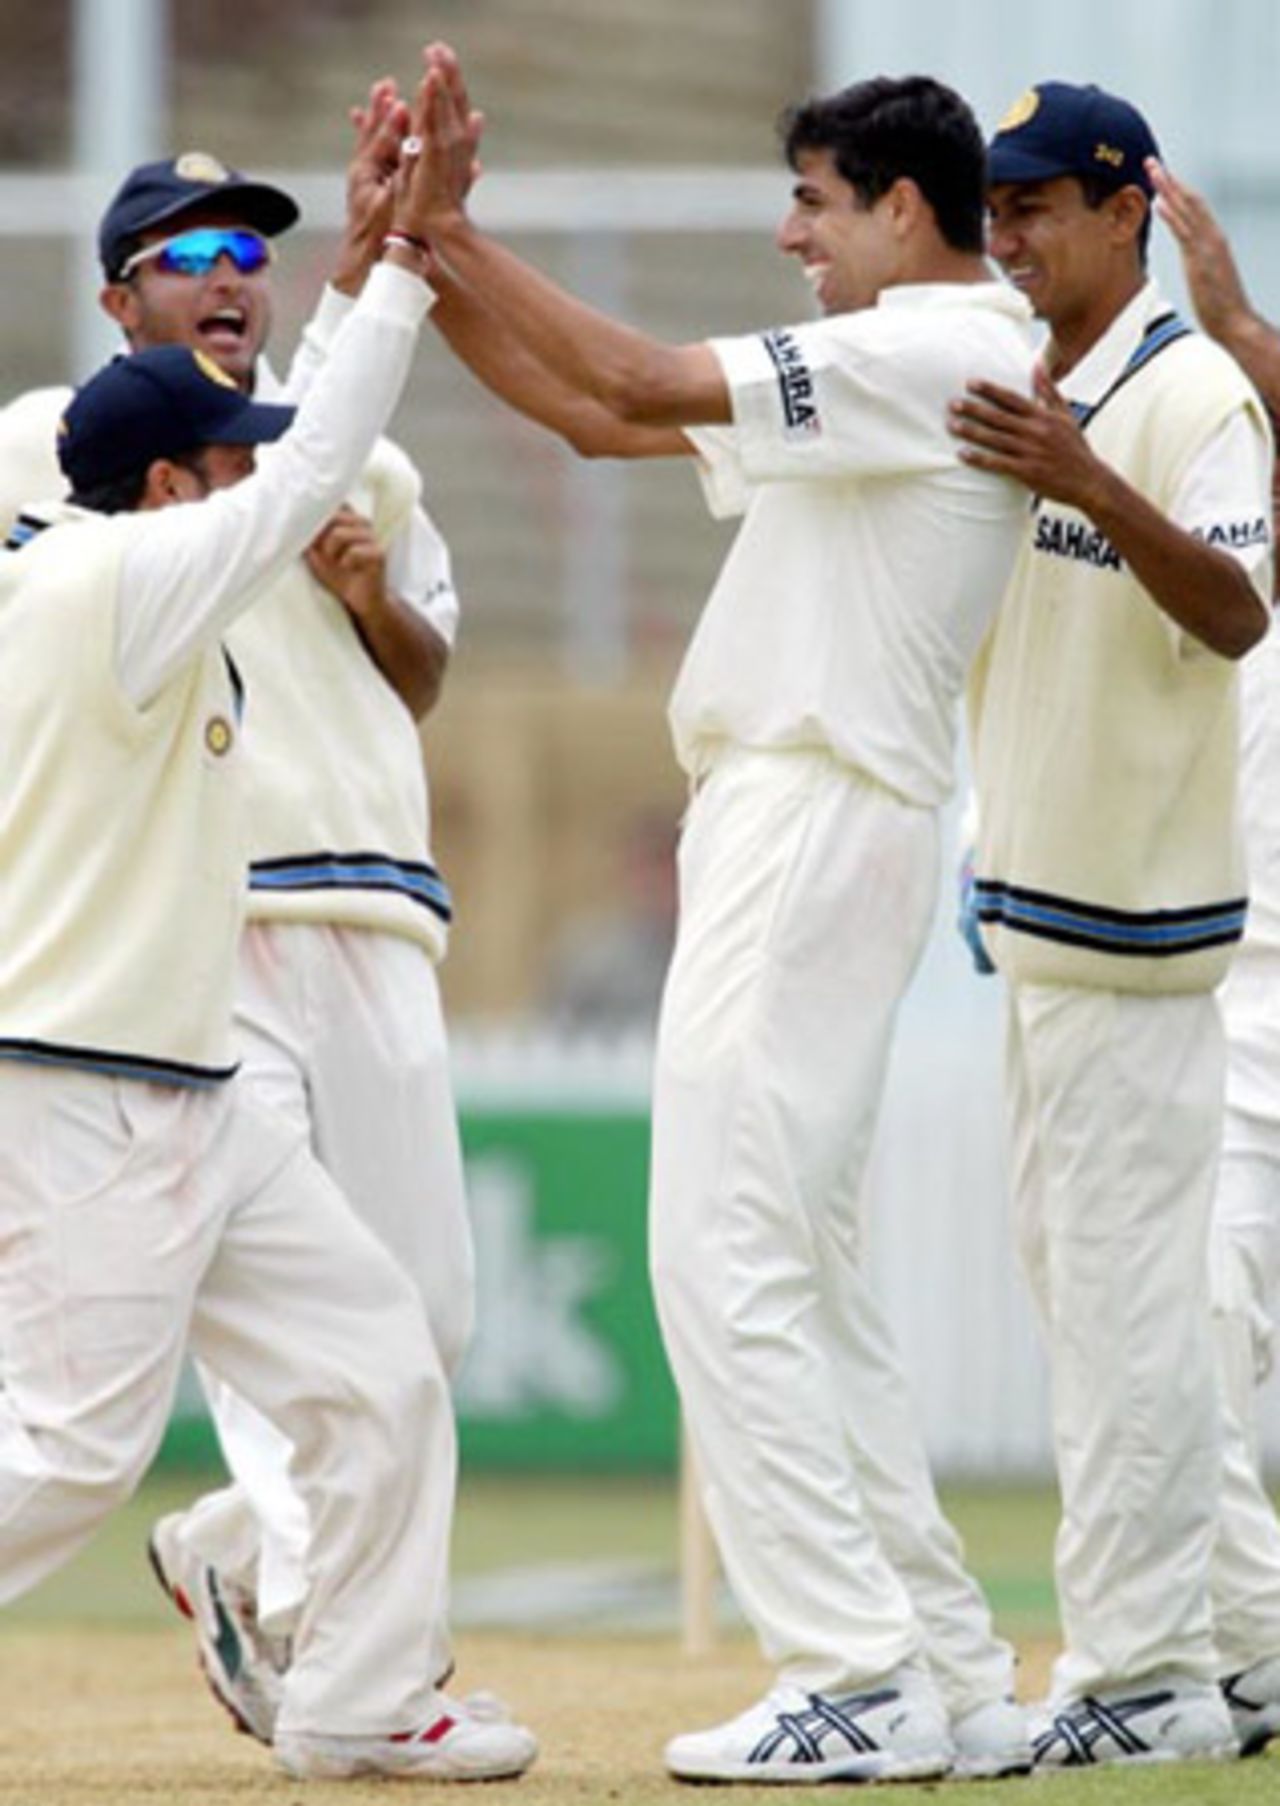 Members of the Indian team celebrate the dismissal of New Zealand batsman Craig McMillan, lbw to Ashish Nehra for 18 in his second innings. From left: Sachin Tendulkar, Sourav Ganguly, Nehra and Tinu Yohannan. 2nd Test: New Zealand v India at Westpac Park, Hamilton, 19-23 December 2002 (22 December 2002).